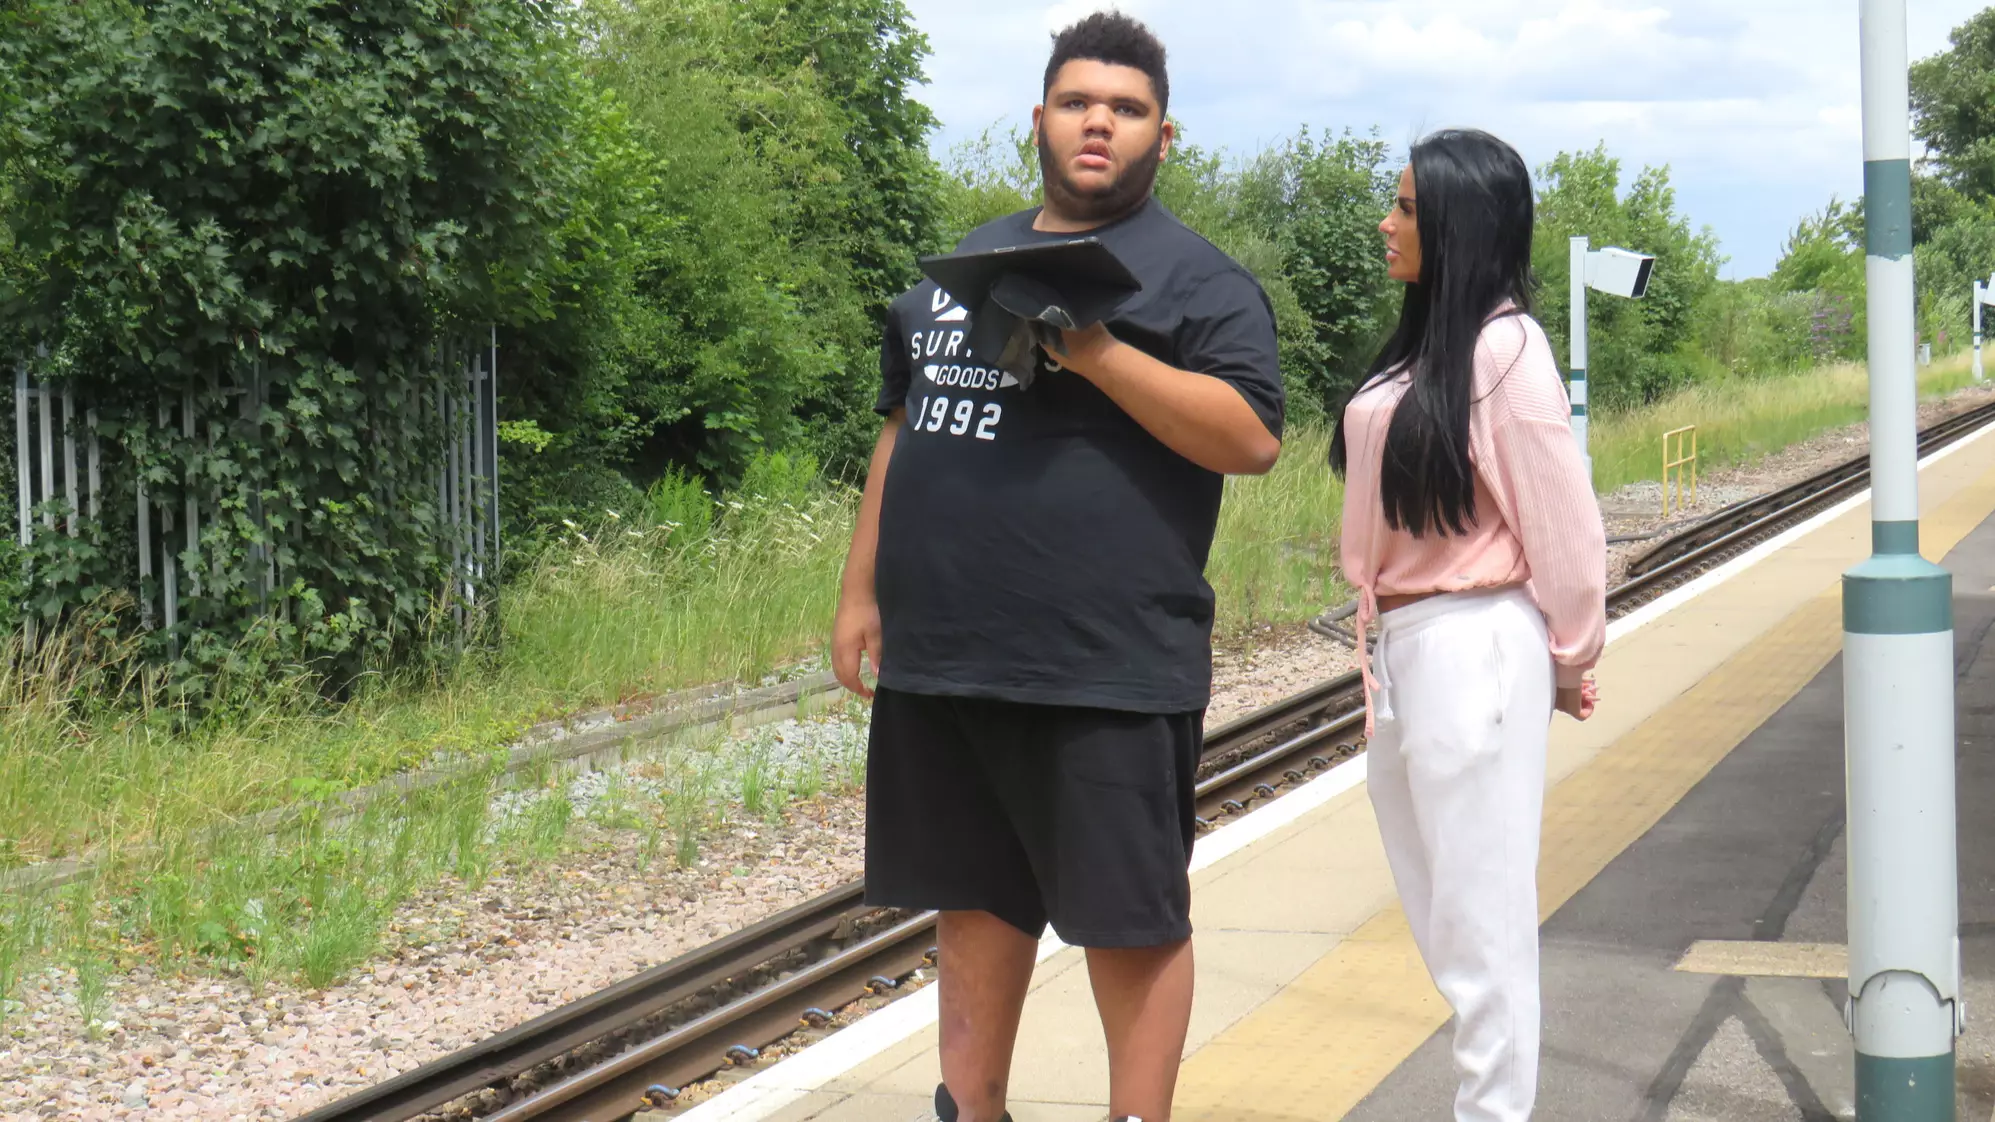 Katie Price's Son Harvey Given Chance To Make Rail Station Announcements After Calls From Fans